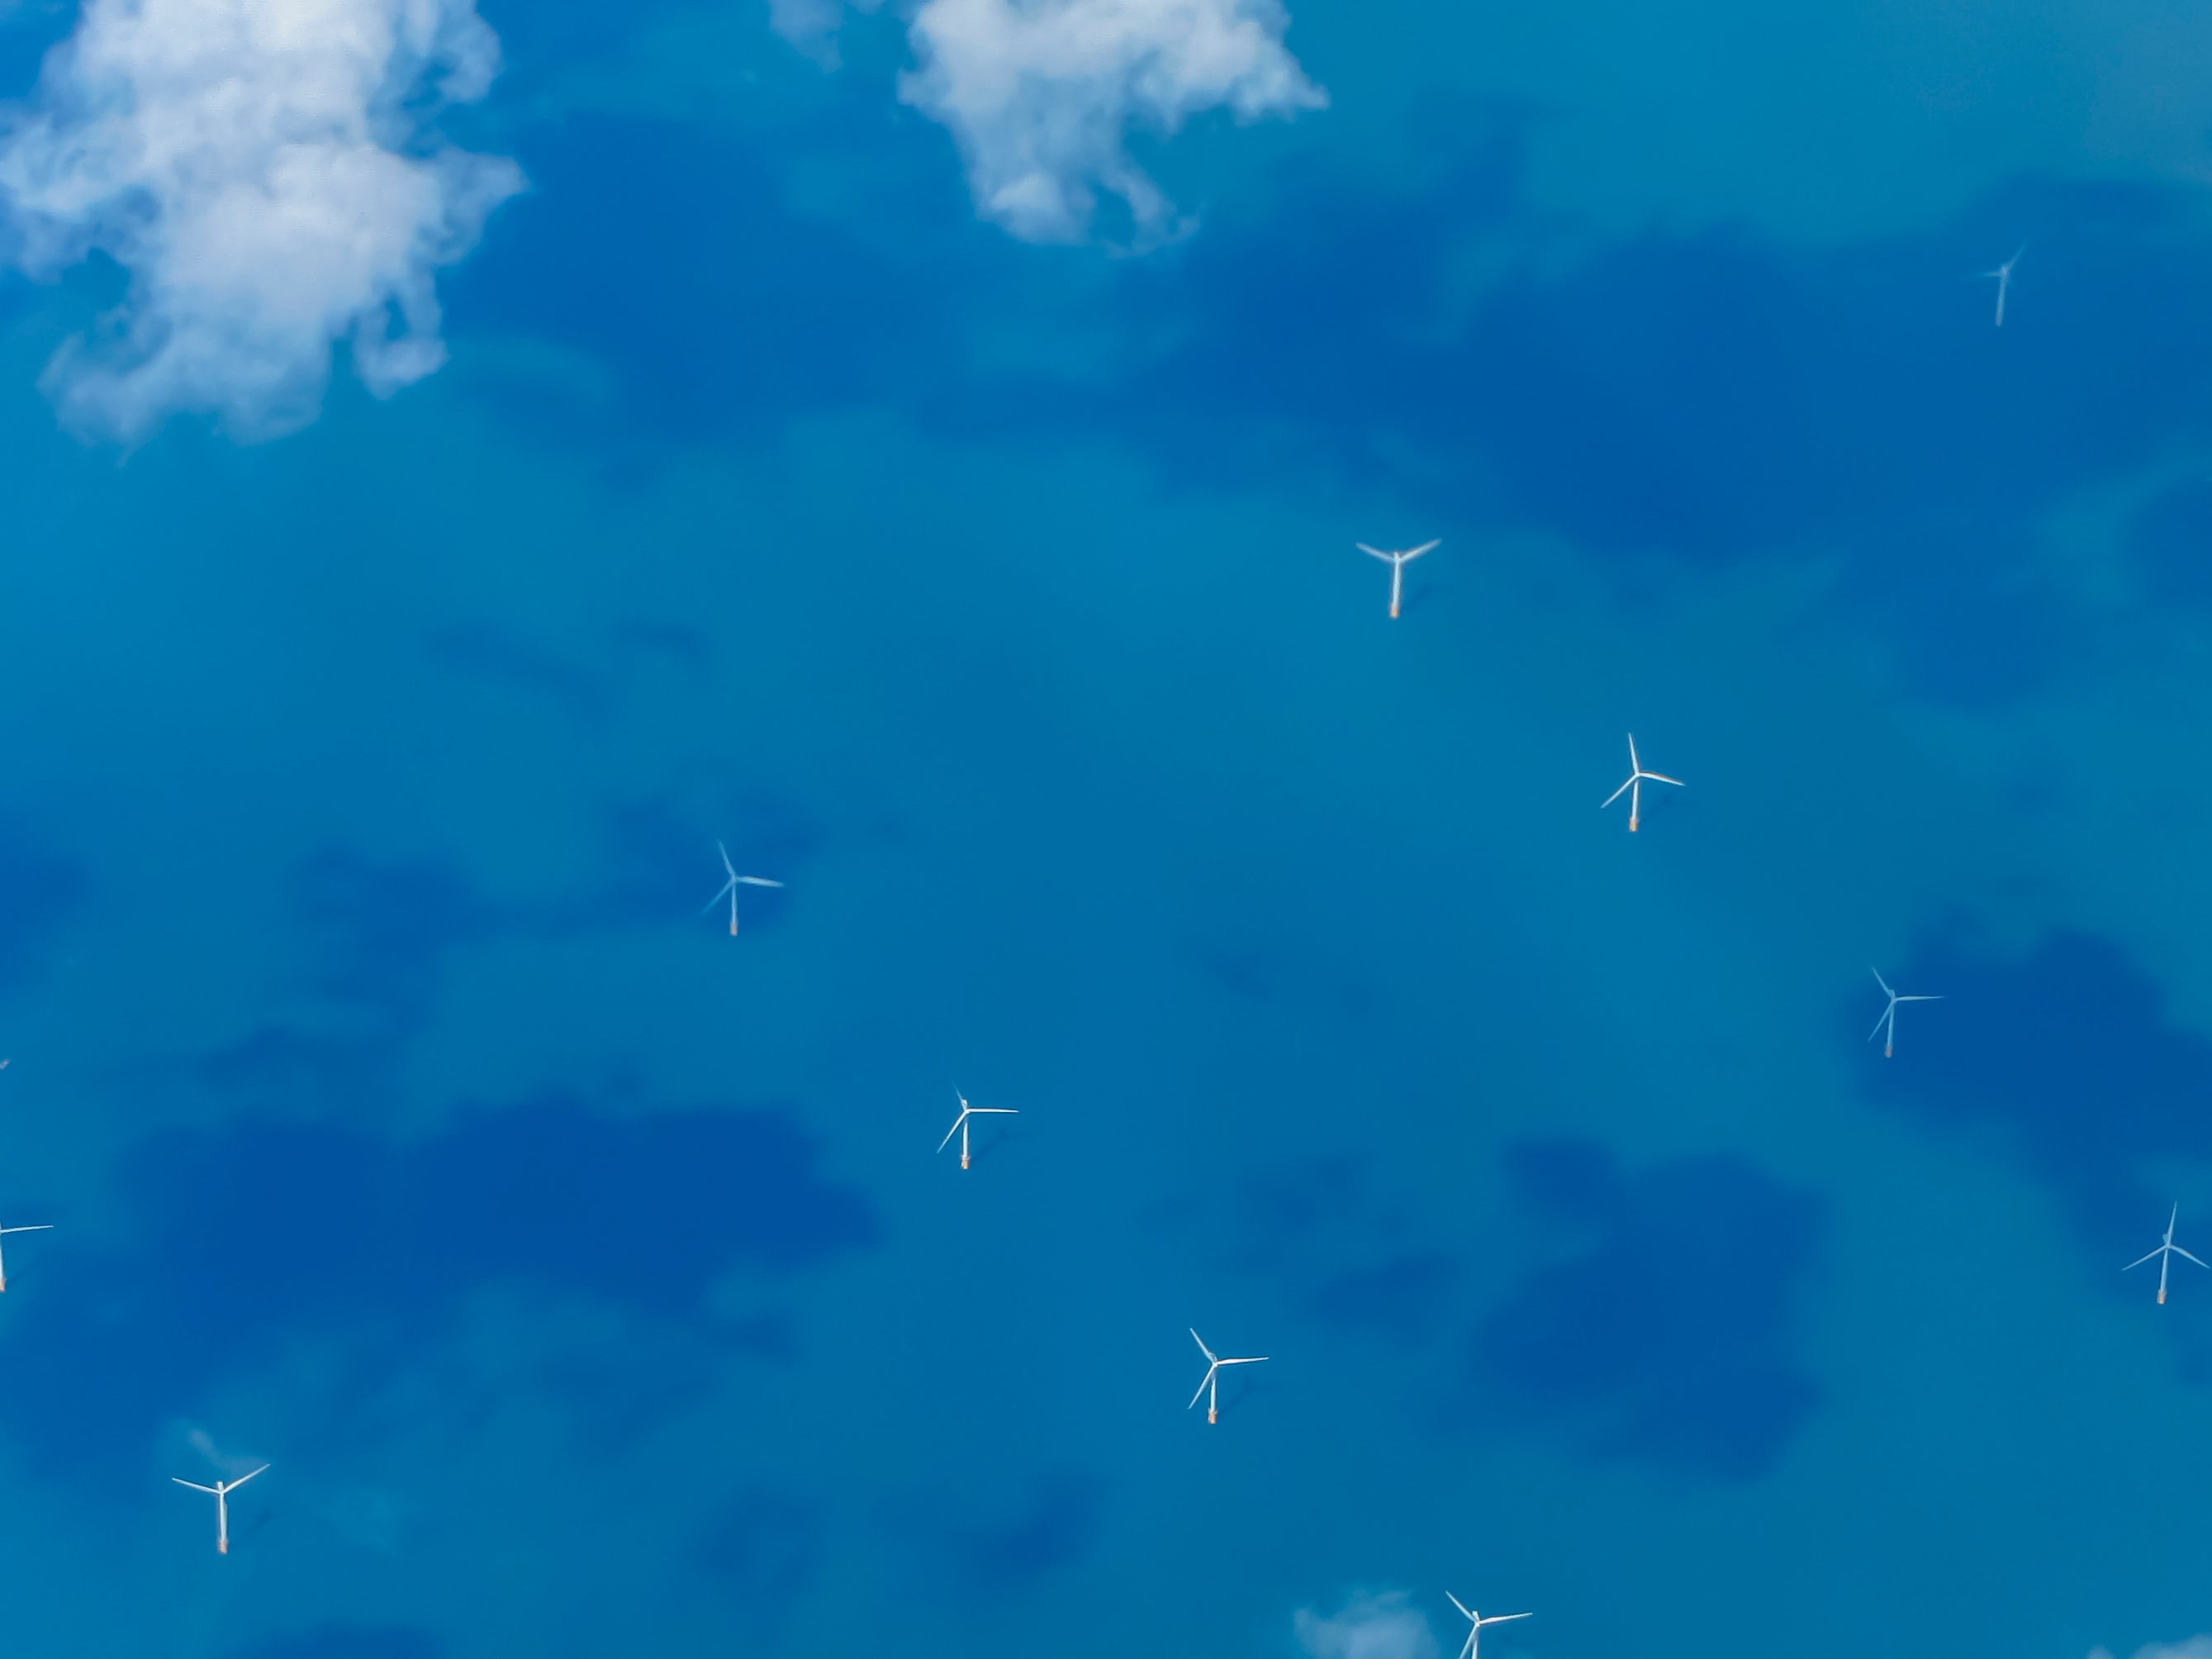 An offshore windfarm photographed from an aeroplane flying over the English Channel